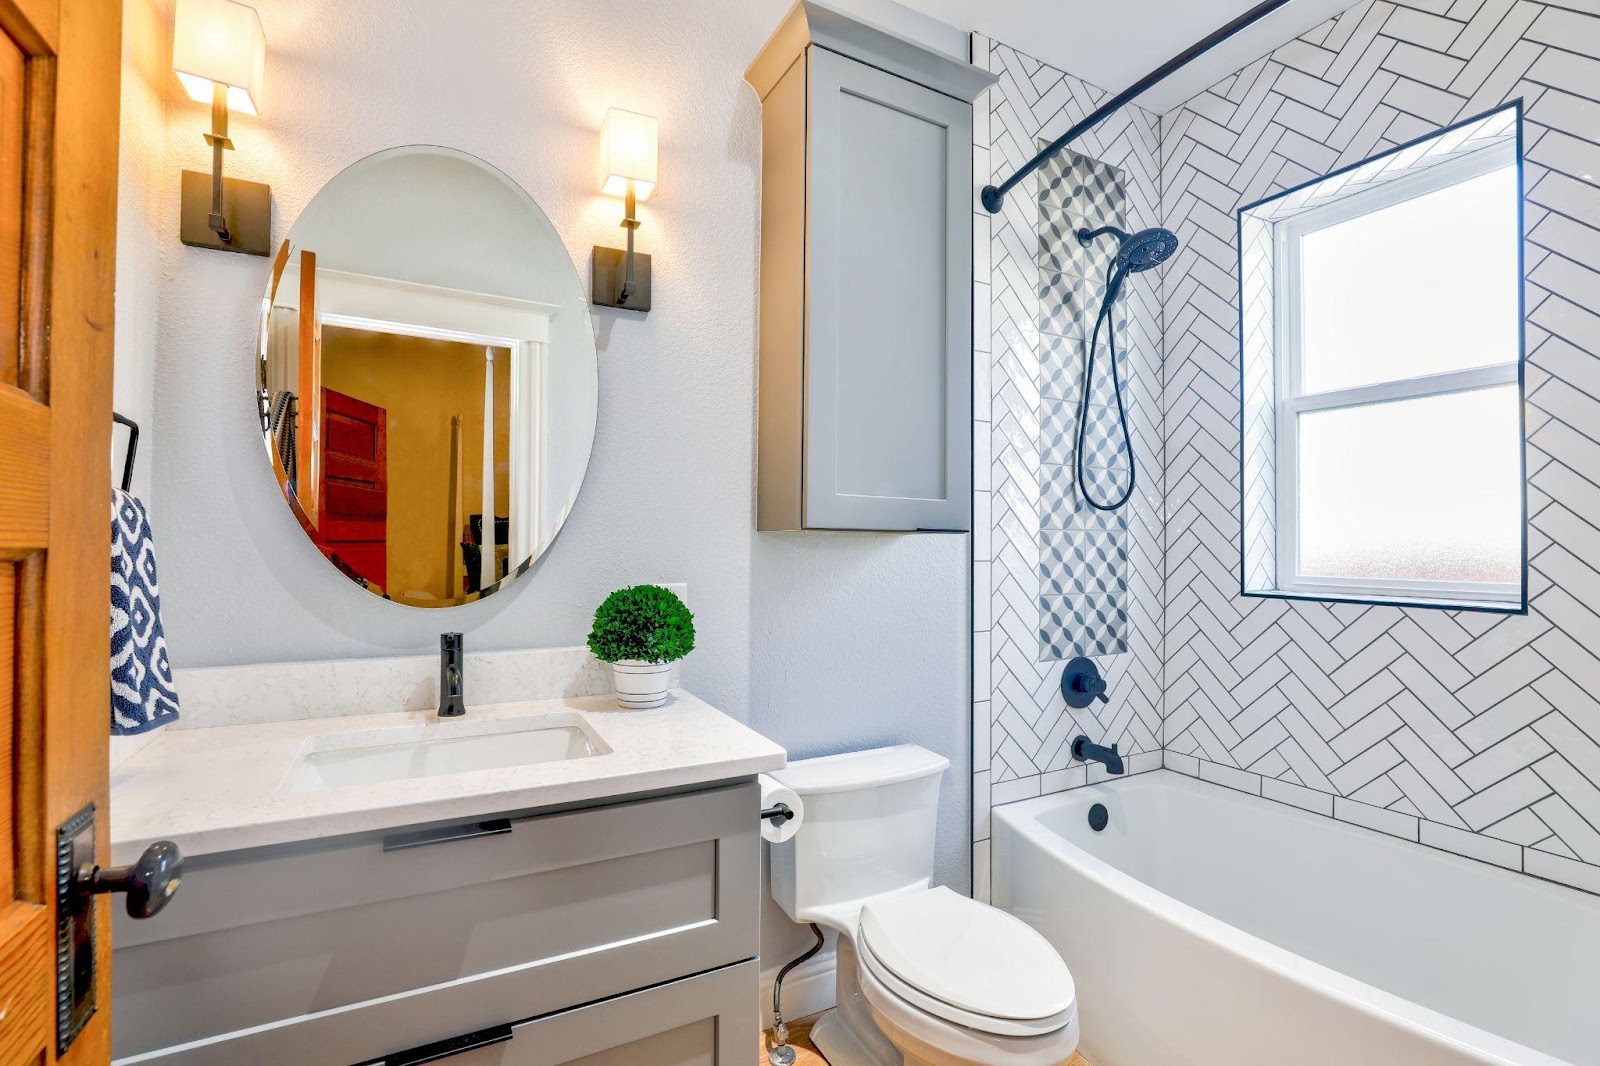 What Should I Ask a Contractor When Remodeling a Bathroom?